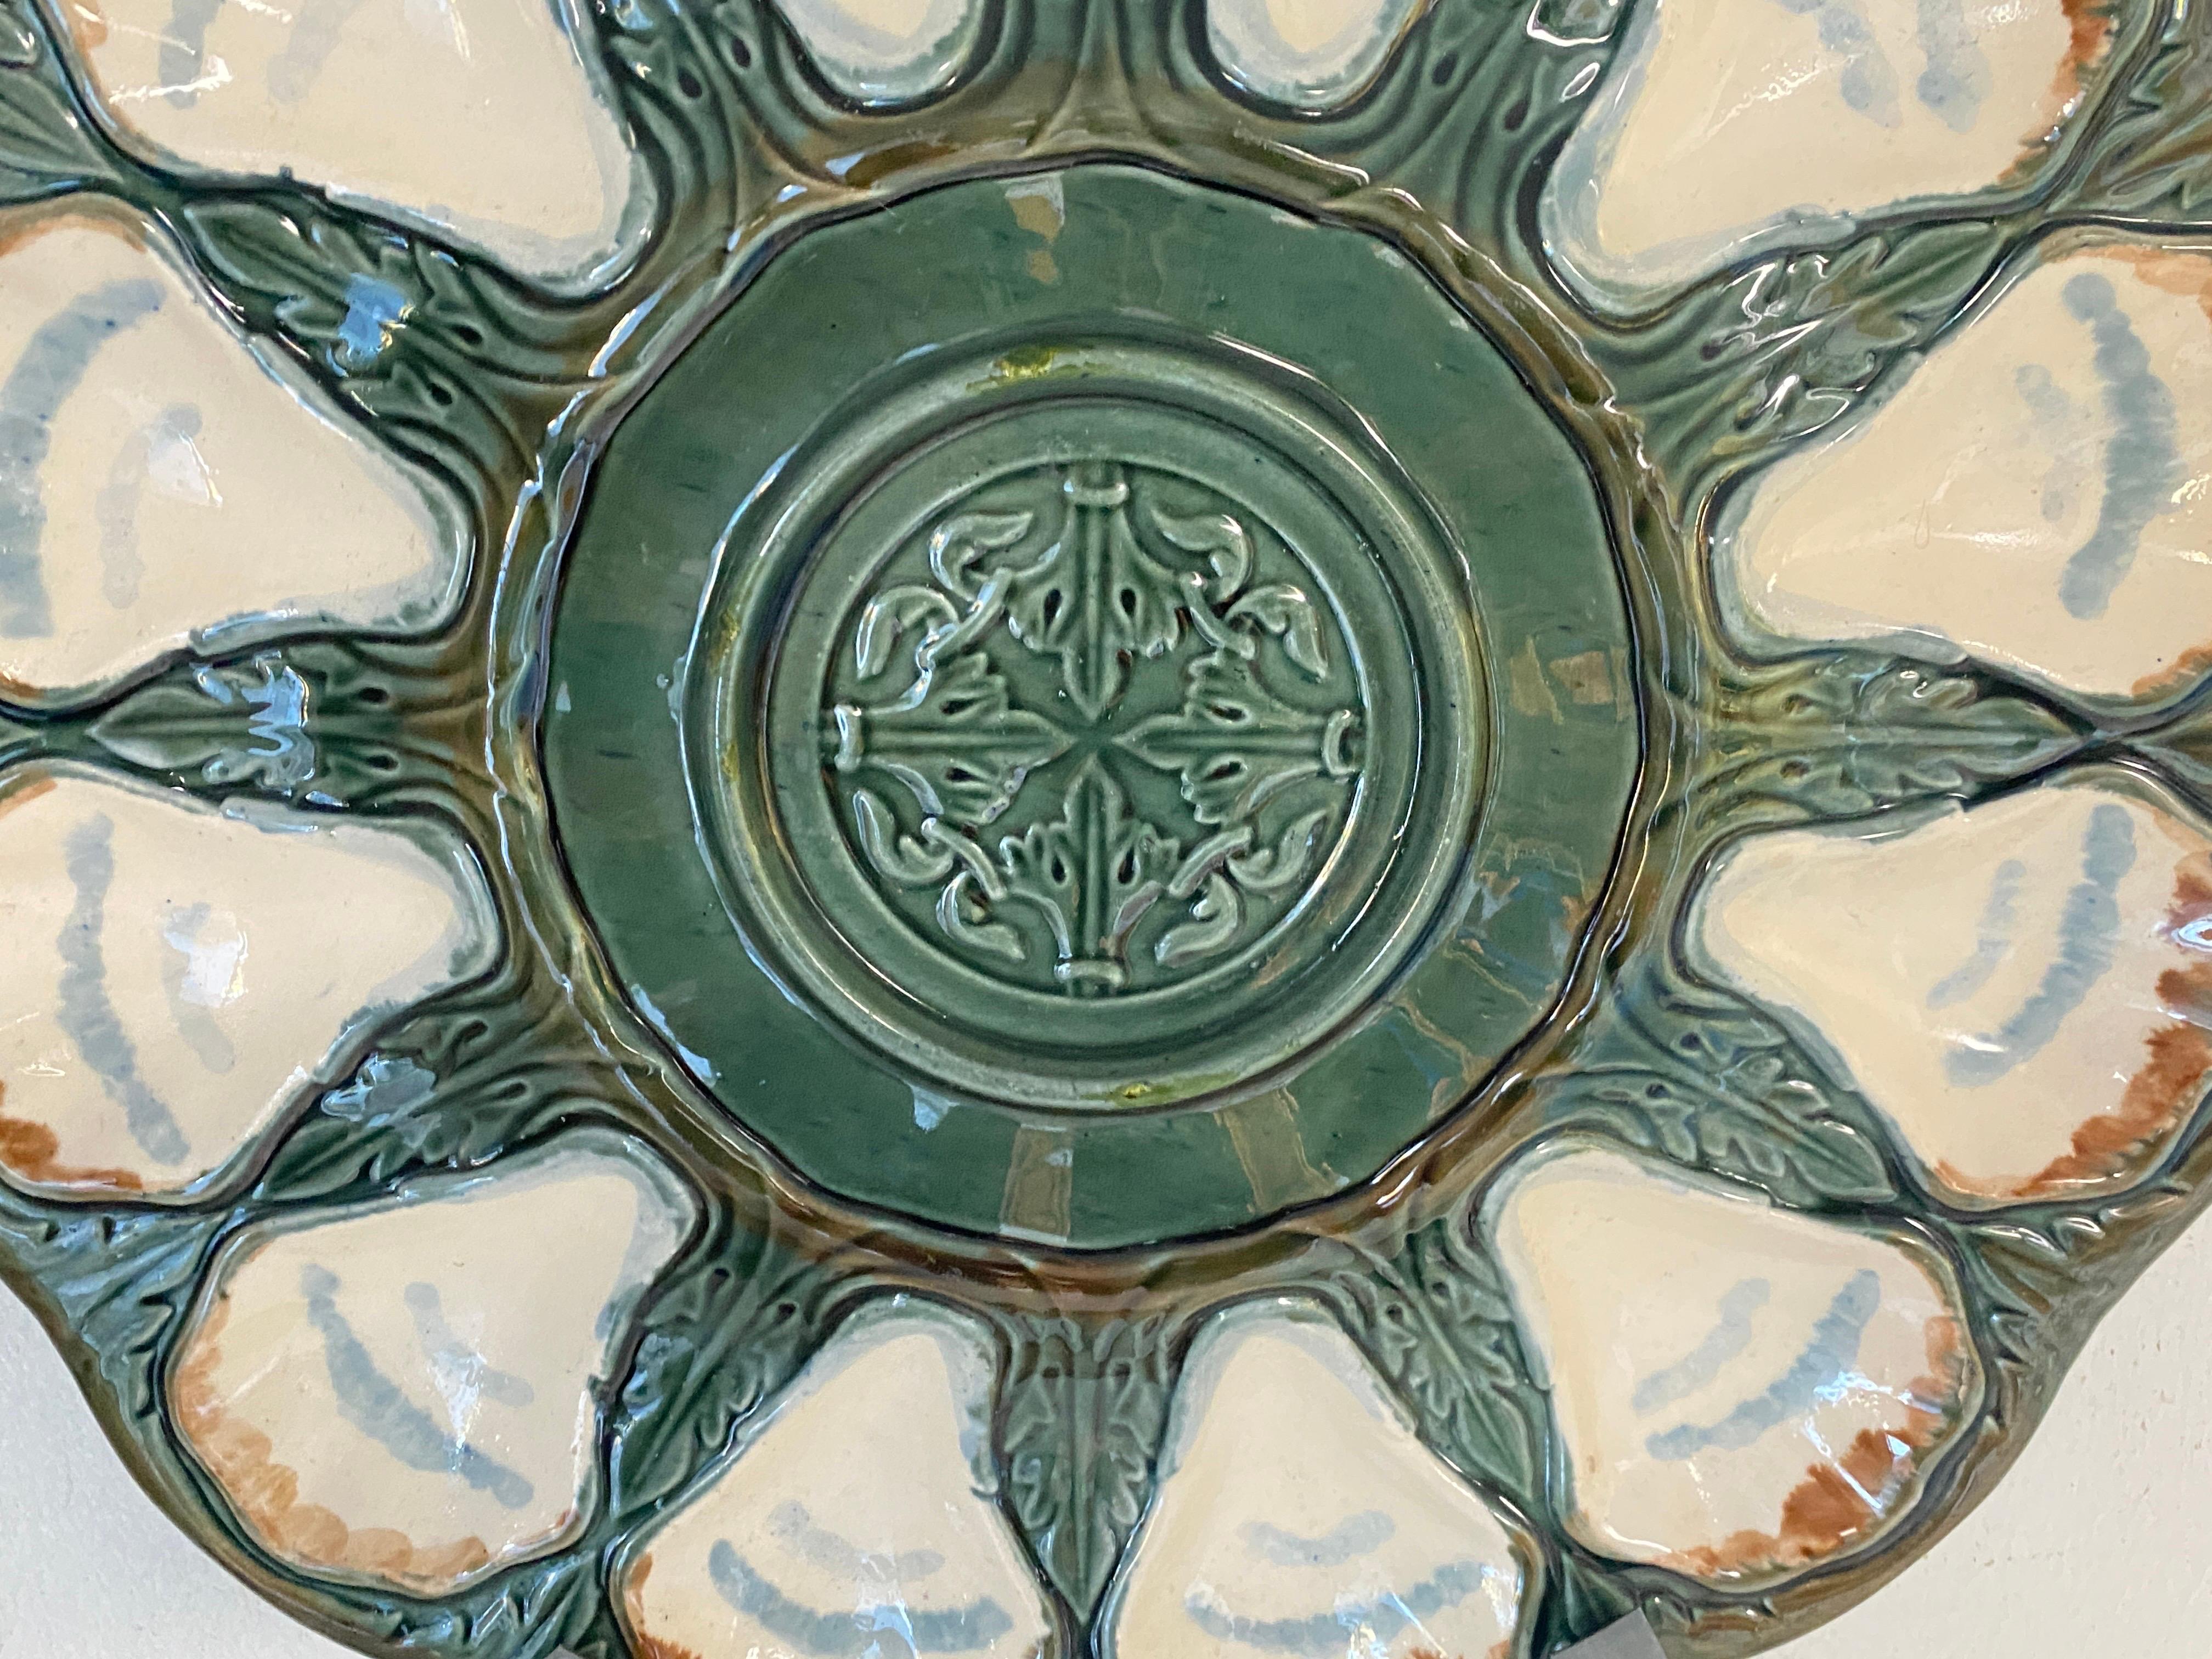 Large Oyster Dish in Majolica Green White Color 19th Century Longchamp France For Sale 2